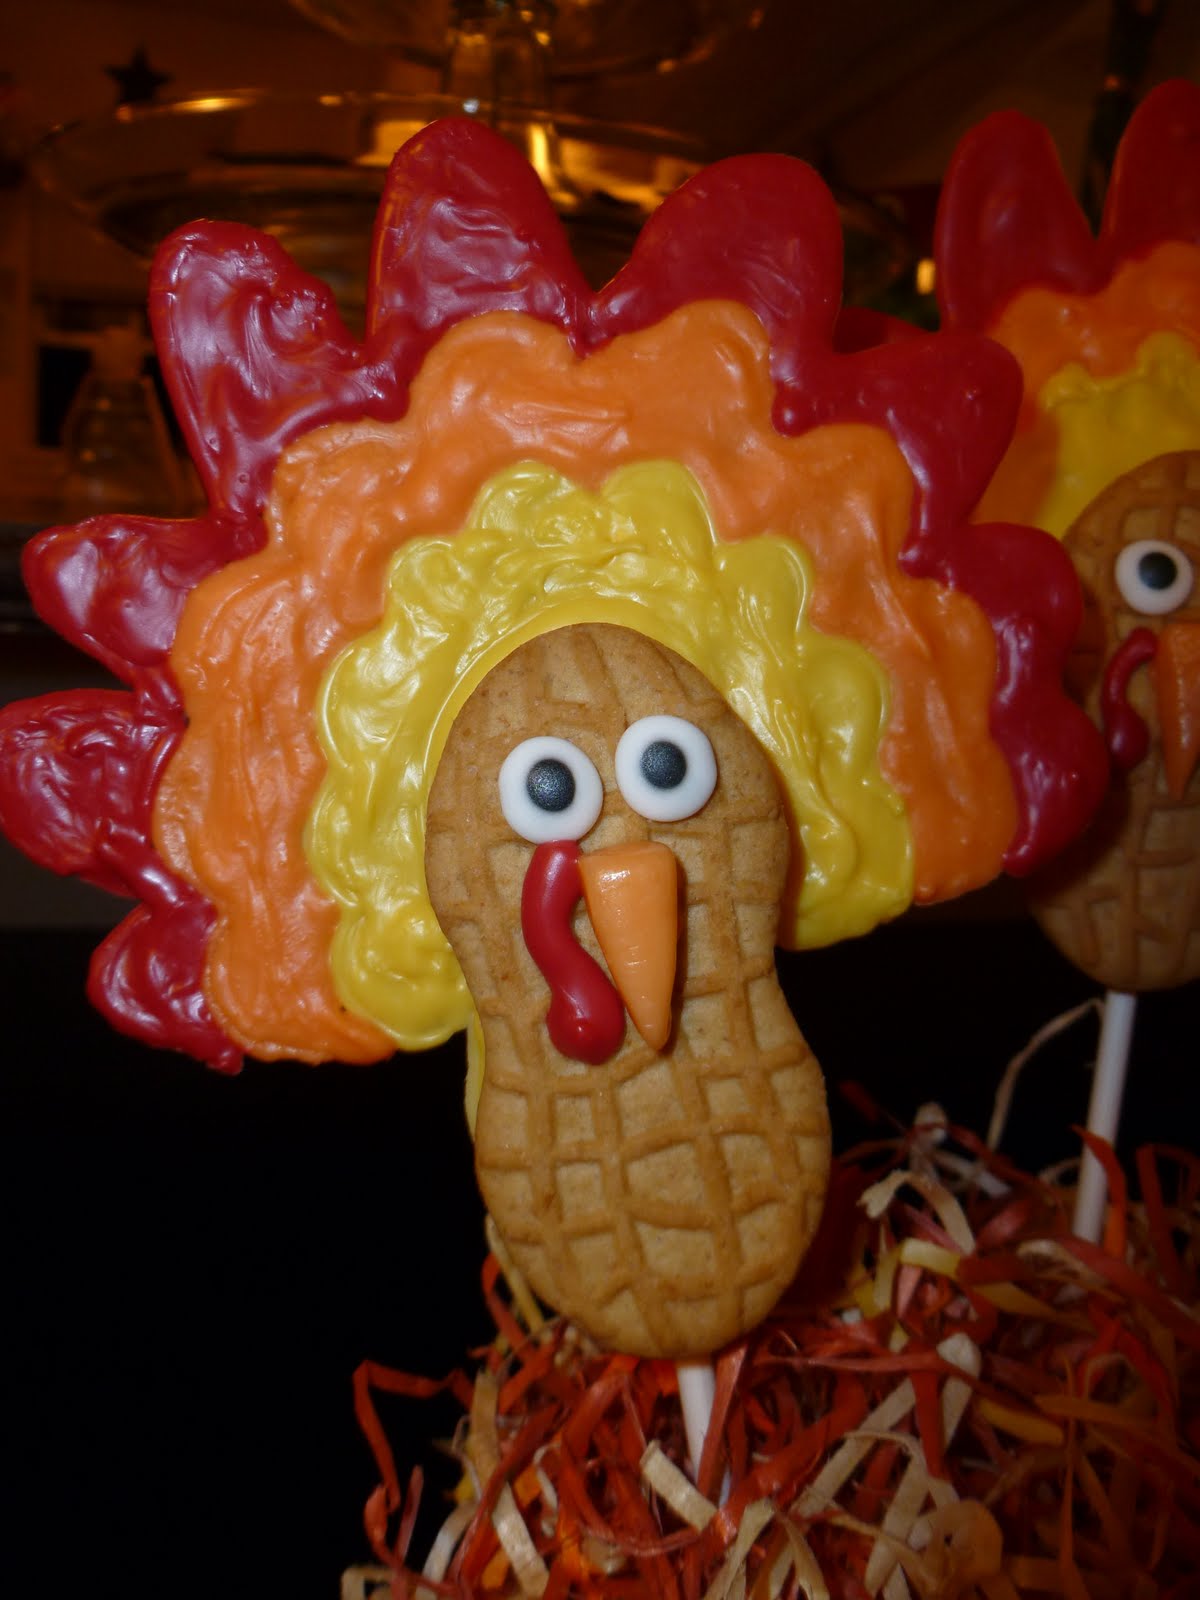 Indulge With Me: Gobble Gobble!